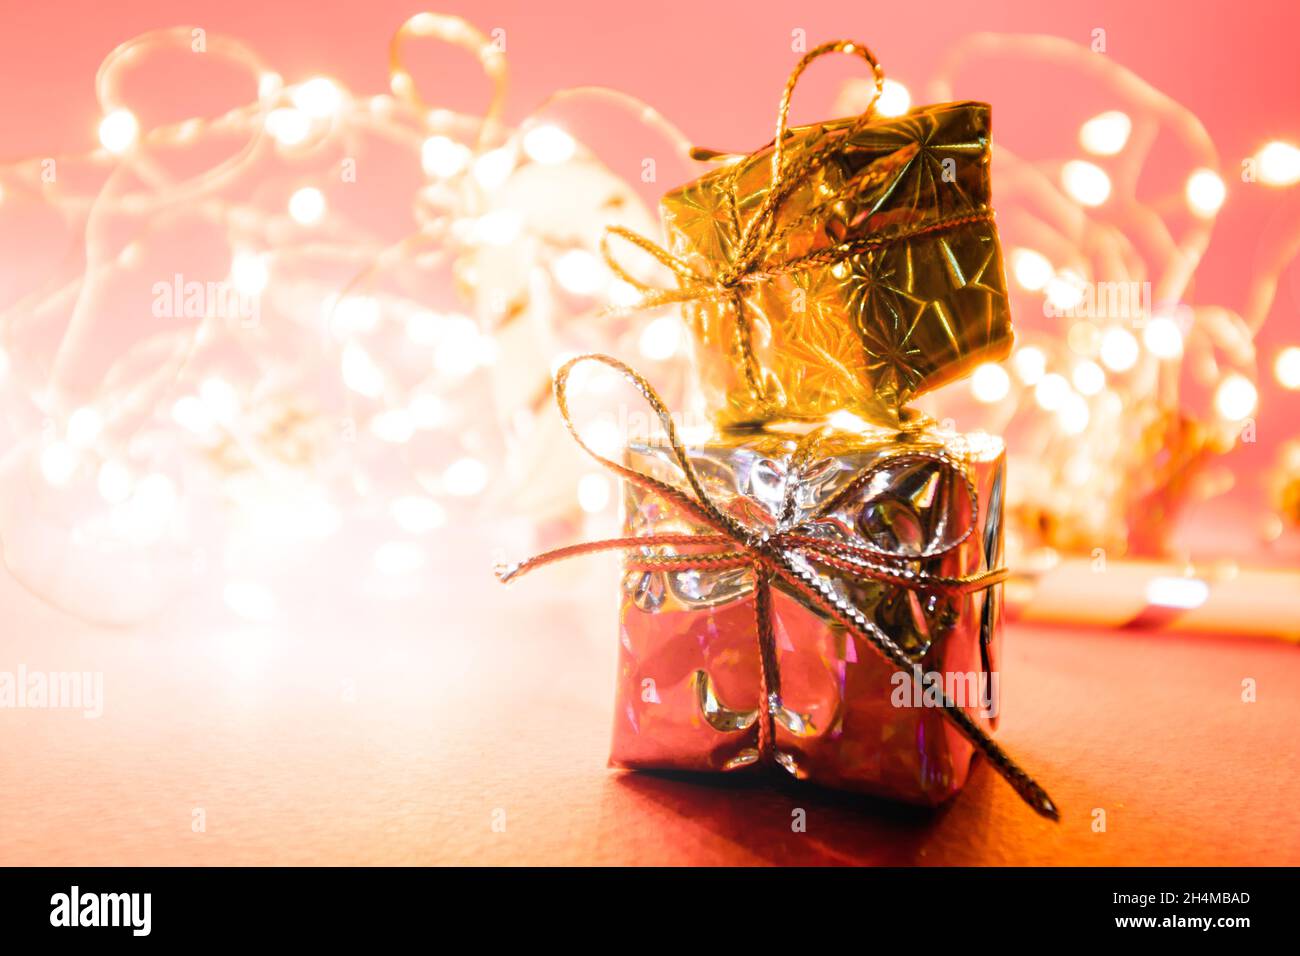 Christmas background with lights and lanterns with gifts in the foreground. Stock Photo